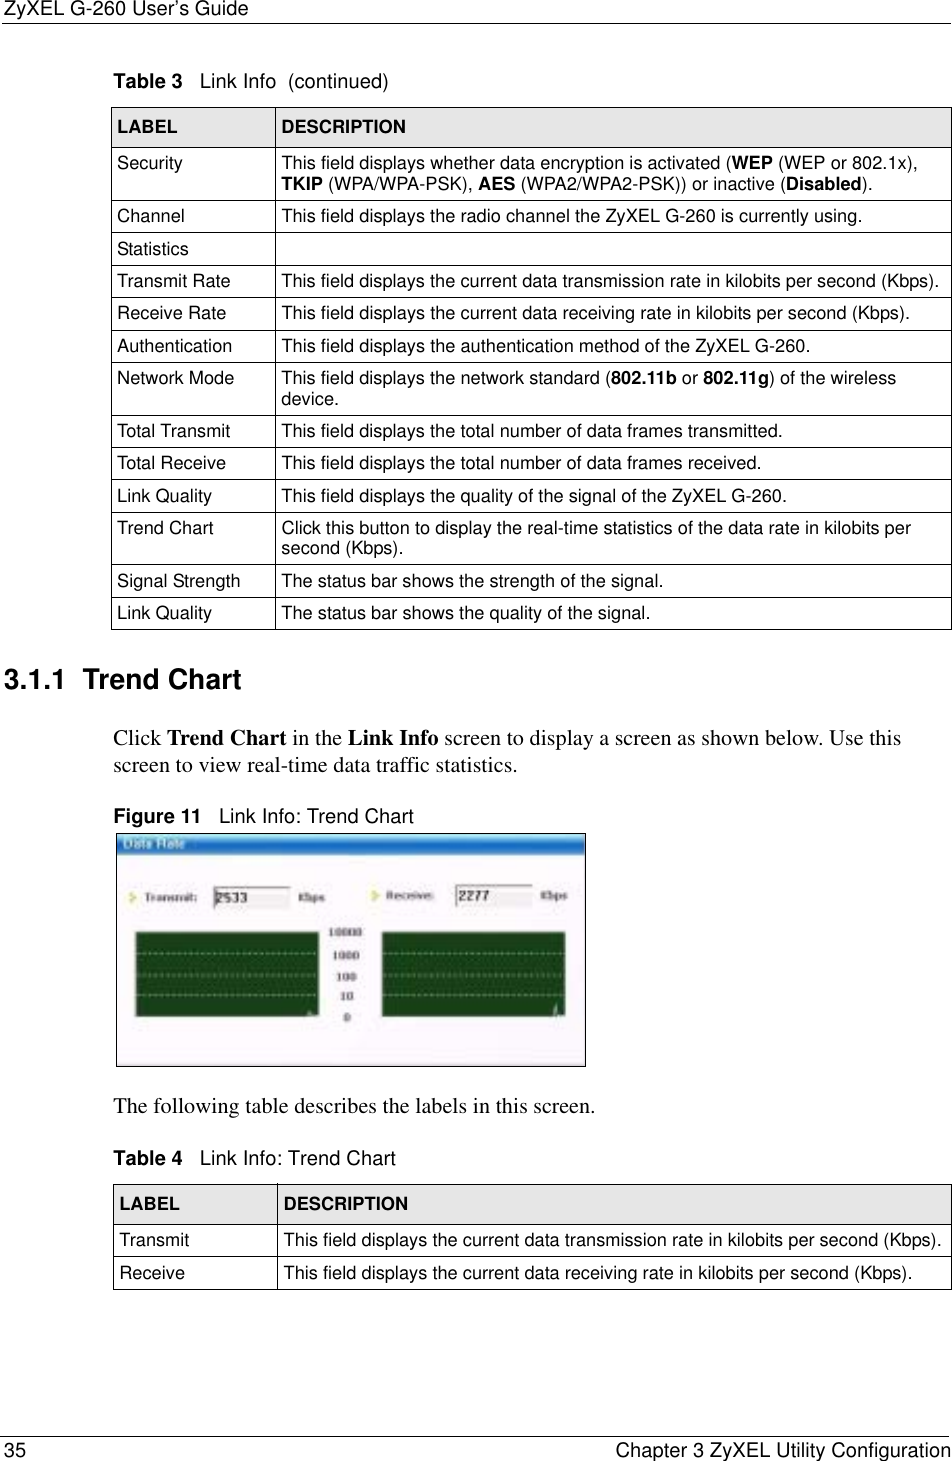 ZyXEL G-260 User’s Guide35 Chapter 3 ZyXEL Utility Configuration3.1.1  Trend Chart Click Trend Chart in the Link Info screen to display a screen as shown below. Use this screen to view real-time data traffic statistics.Figure 11   Link Info: Trend Chart The following table describes the labels in this screen. Security  This field displays whether data encryption is activated (WEP (WEP or 802.1x), TKIP (WPA/WPA-PSK), AES (WPA2/WPA2-PSK)) or inactive (Disabled).Channel This field displays the radio channel the ZyXEL G-260 is currently using.StatisticsTransmit Rate This field displays the current data transmission rate in kilobits per second (Kbps).Receive Rate  This field displays the current data receiving rate in kilobits per second (Kbps).Authentication  This field displays the authentication method of the ZyXEL G-260.Network Mode  This field displays the network standard (802.11b or 802.11g) of the wireless device.Total Transmit  This field displays the total number of data frames transmitted.Total Receive  This field displays the total number of data frames received.Link Quality This field displays the quality of the signal of the ZyXEL G-260.Trend Chart  Click this button to display the real-time statistics of the data rate in kilobits per second (Kbps).Signal Strength  The status bar shows the strength of the signal.Link Quality  The status bar shows the quality of the signal.Table 3   Link Info  (continued)LABEL DESCRIPTIONTable 4   Link Info: Trend Chart LABEL DESCRIPTIONTransmit This field displays the current data transmission rate in kilobits per second (Kbps).Receive This field displays the current data receiving rate in kilobits per second (Kbps).